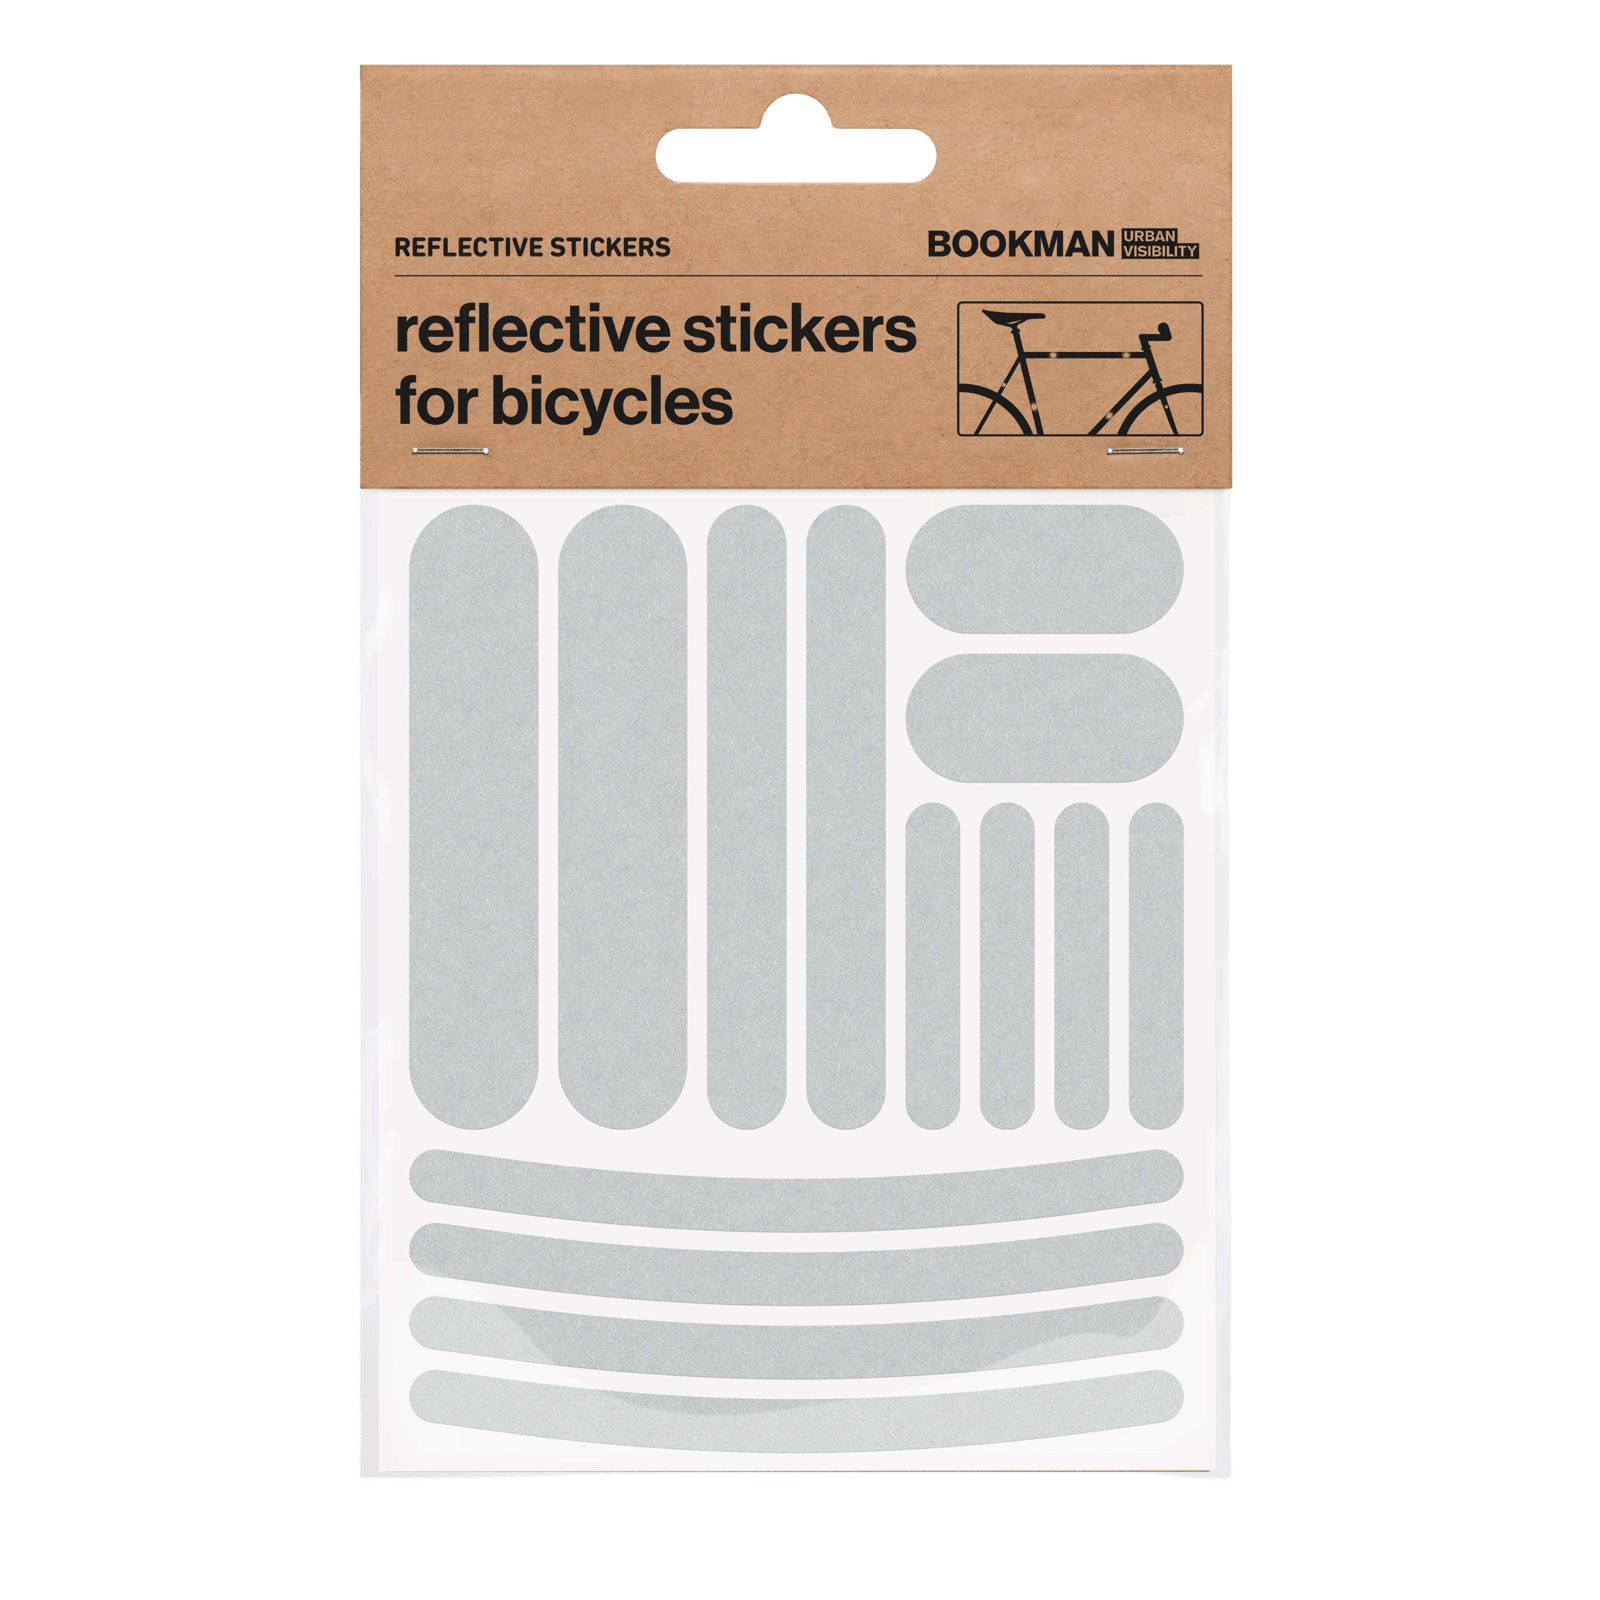 Bookman Urban Visibility Reflective Bicycle Stickers Strips White 1 st